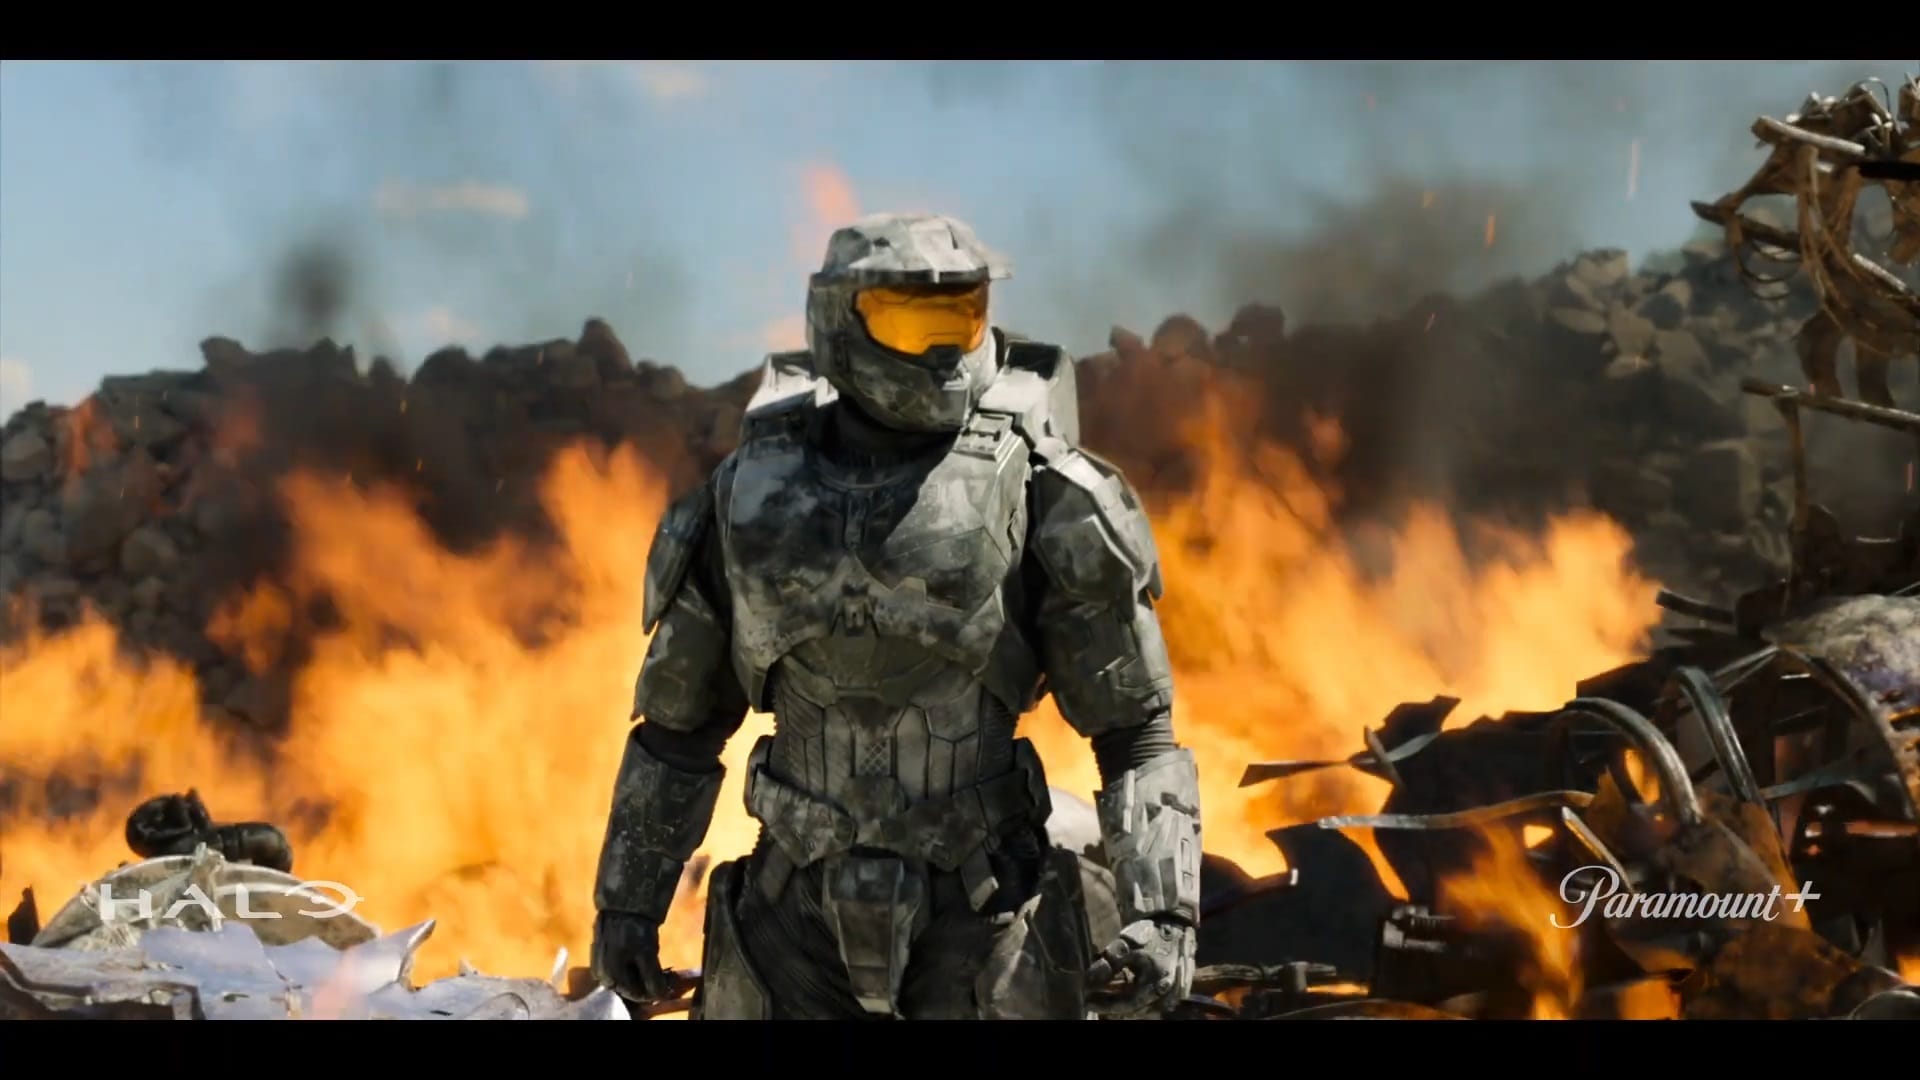 Halo The Series: Paramount Releases New Trailer Ahead Of Next Week's  Premiere - Game Informer